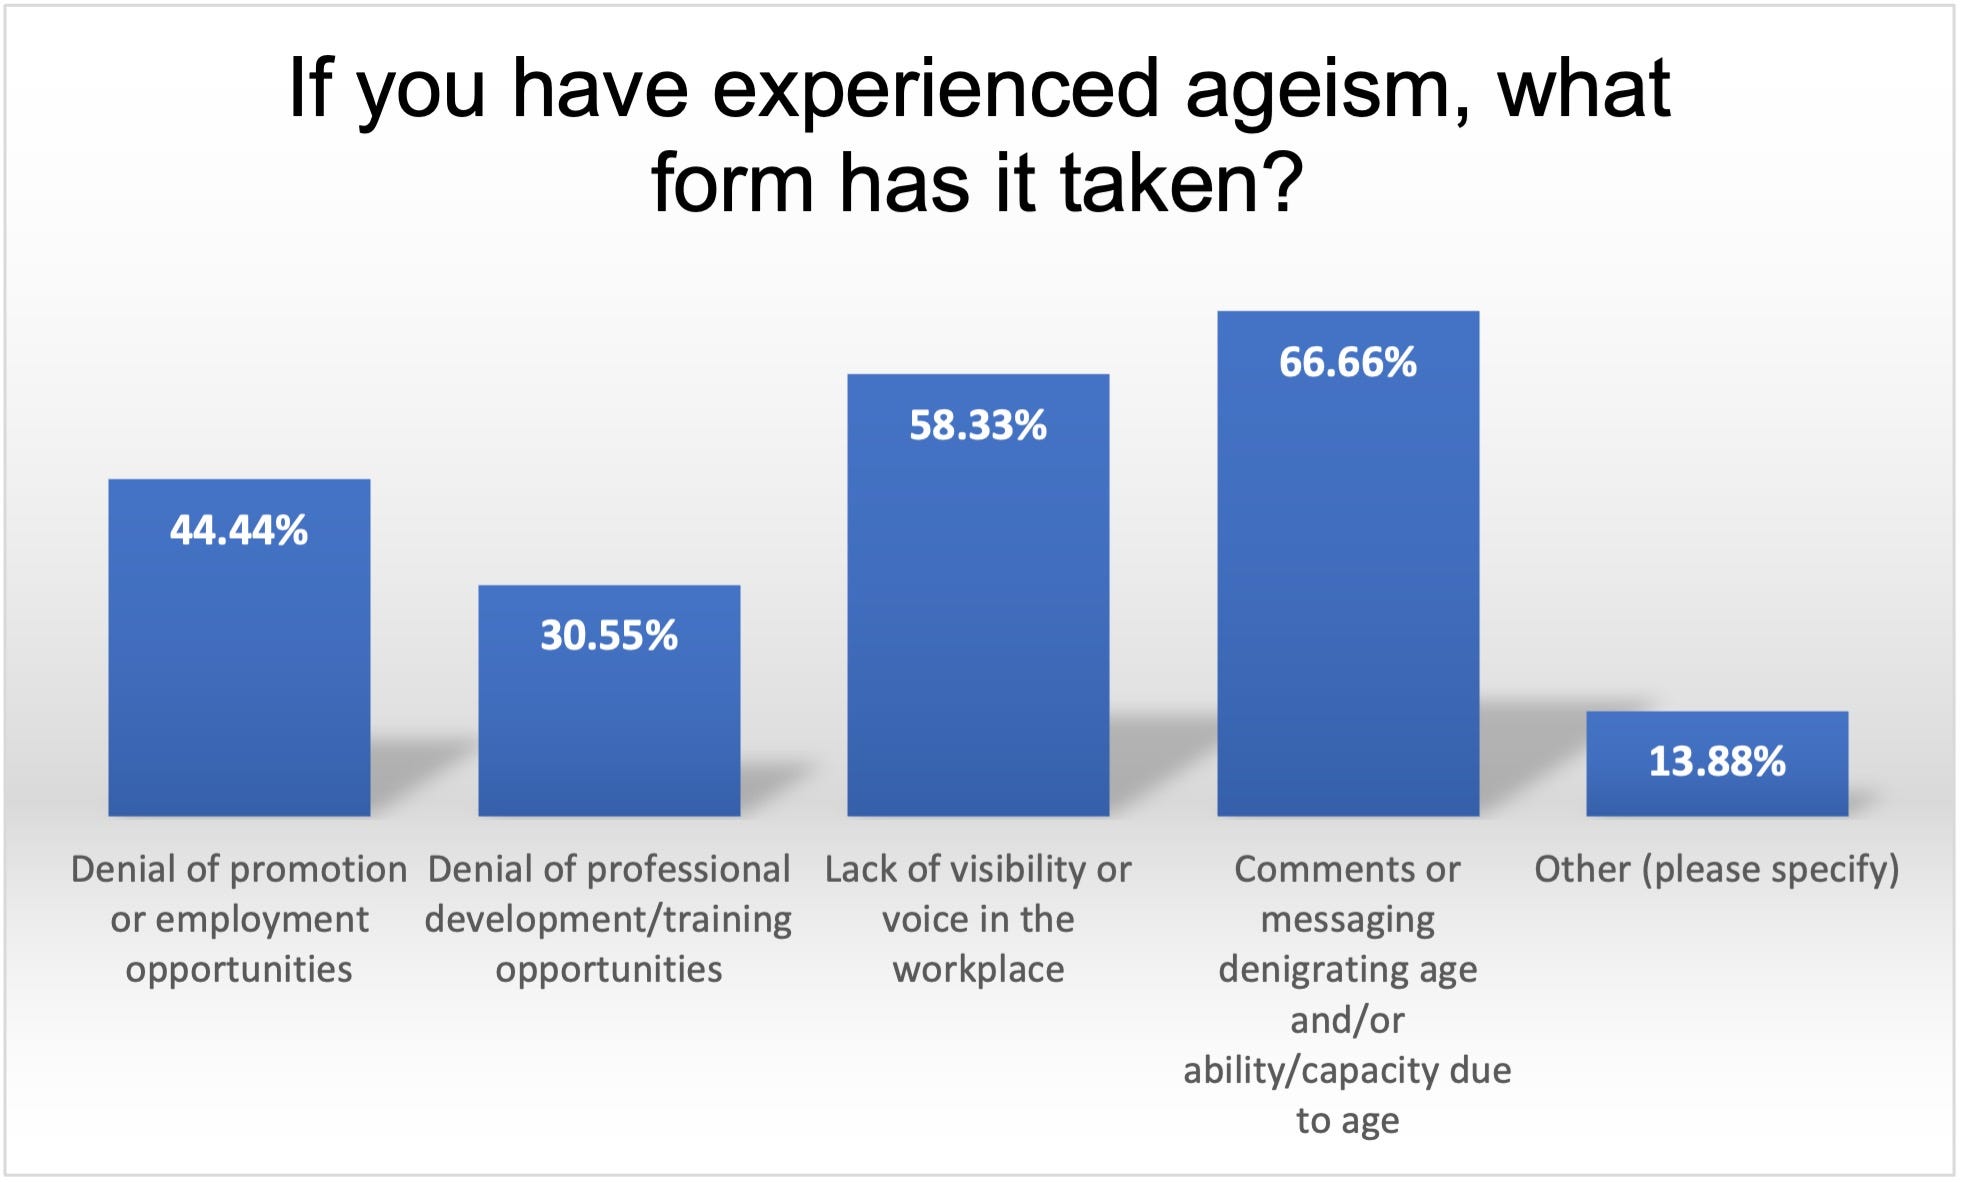 A bar graph showing percentages of people who have experienced different forms of ageism in museum and visual arts workplace.